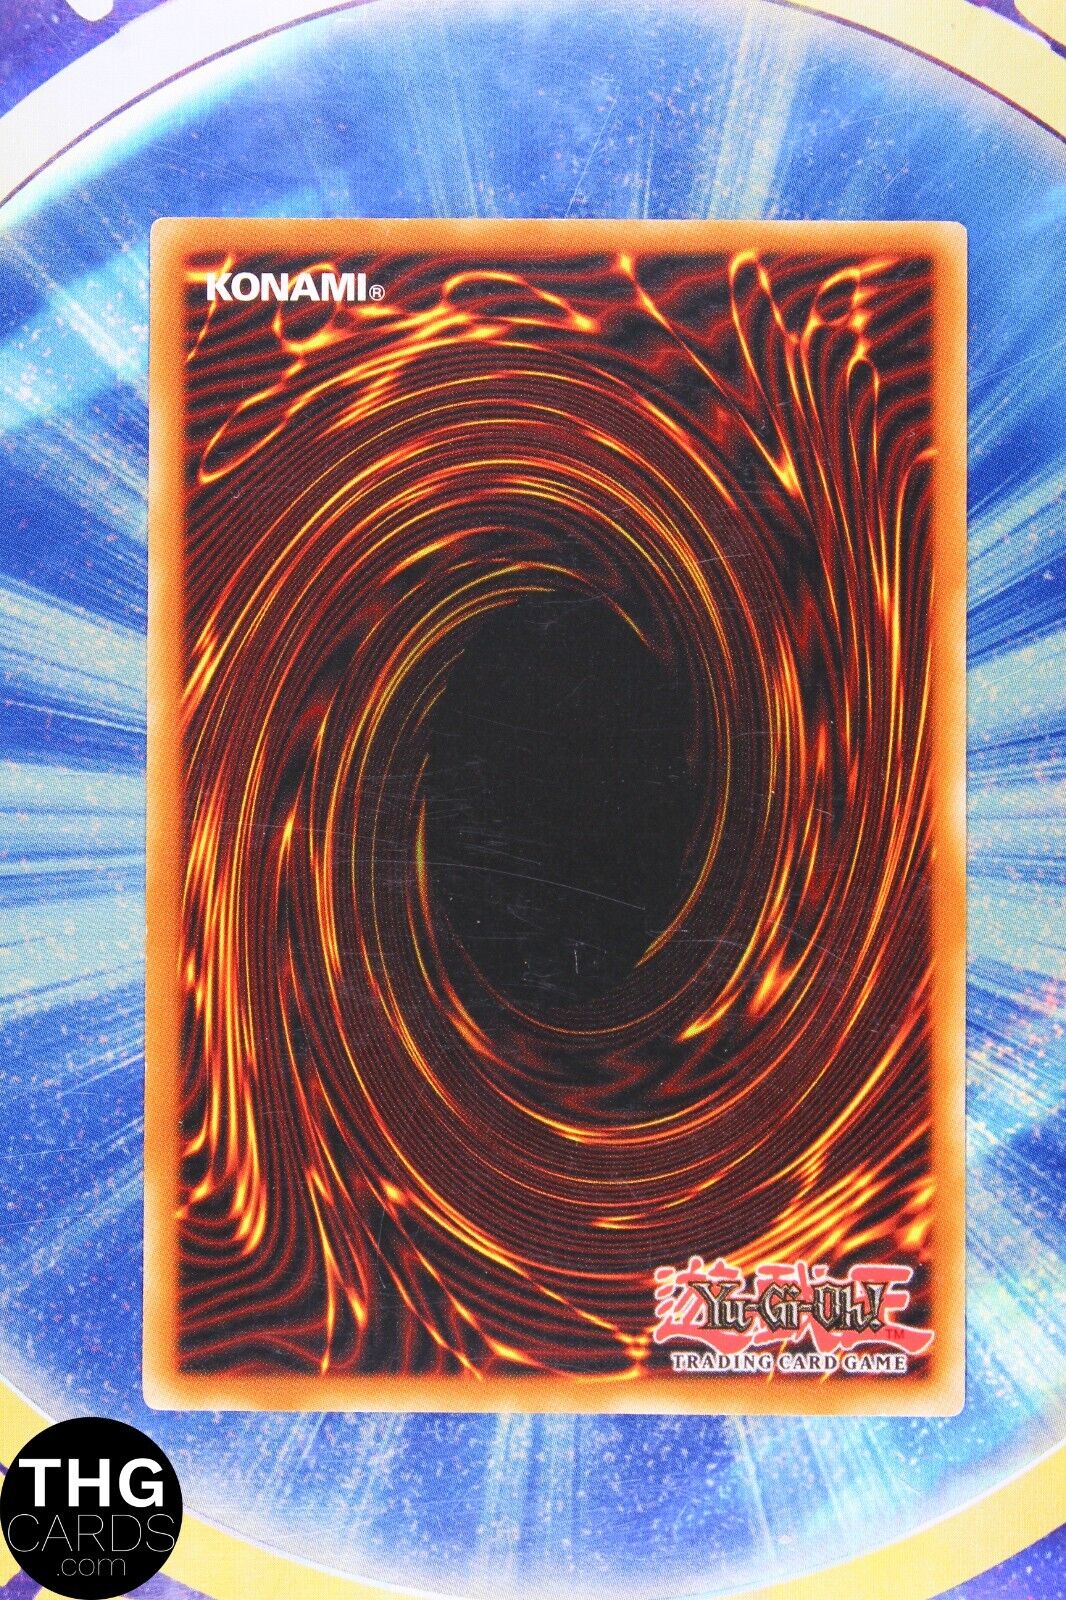 Contract with Exodia DR1-EN193 Common Yugioh Card